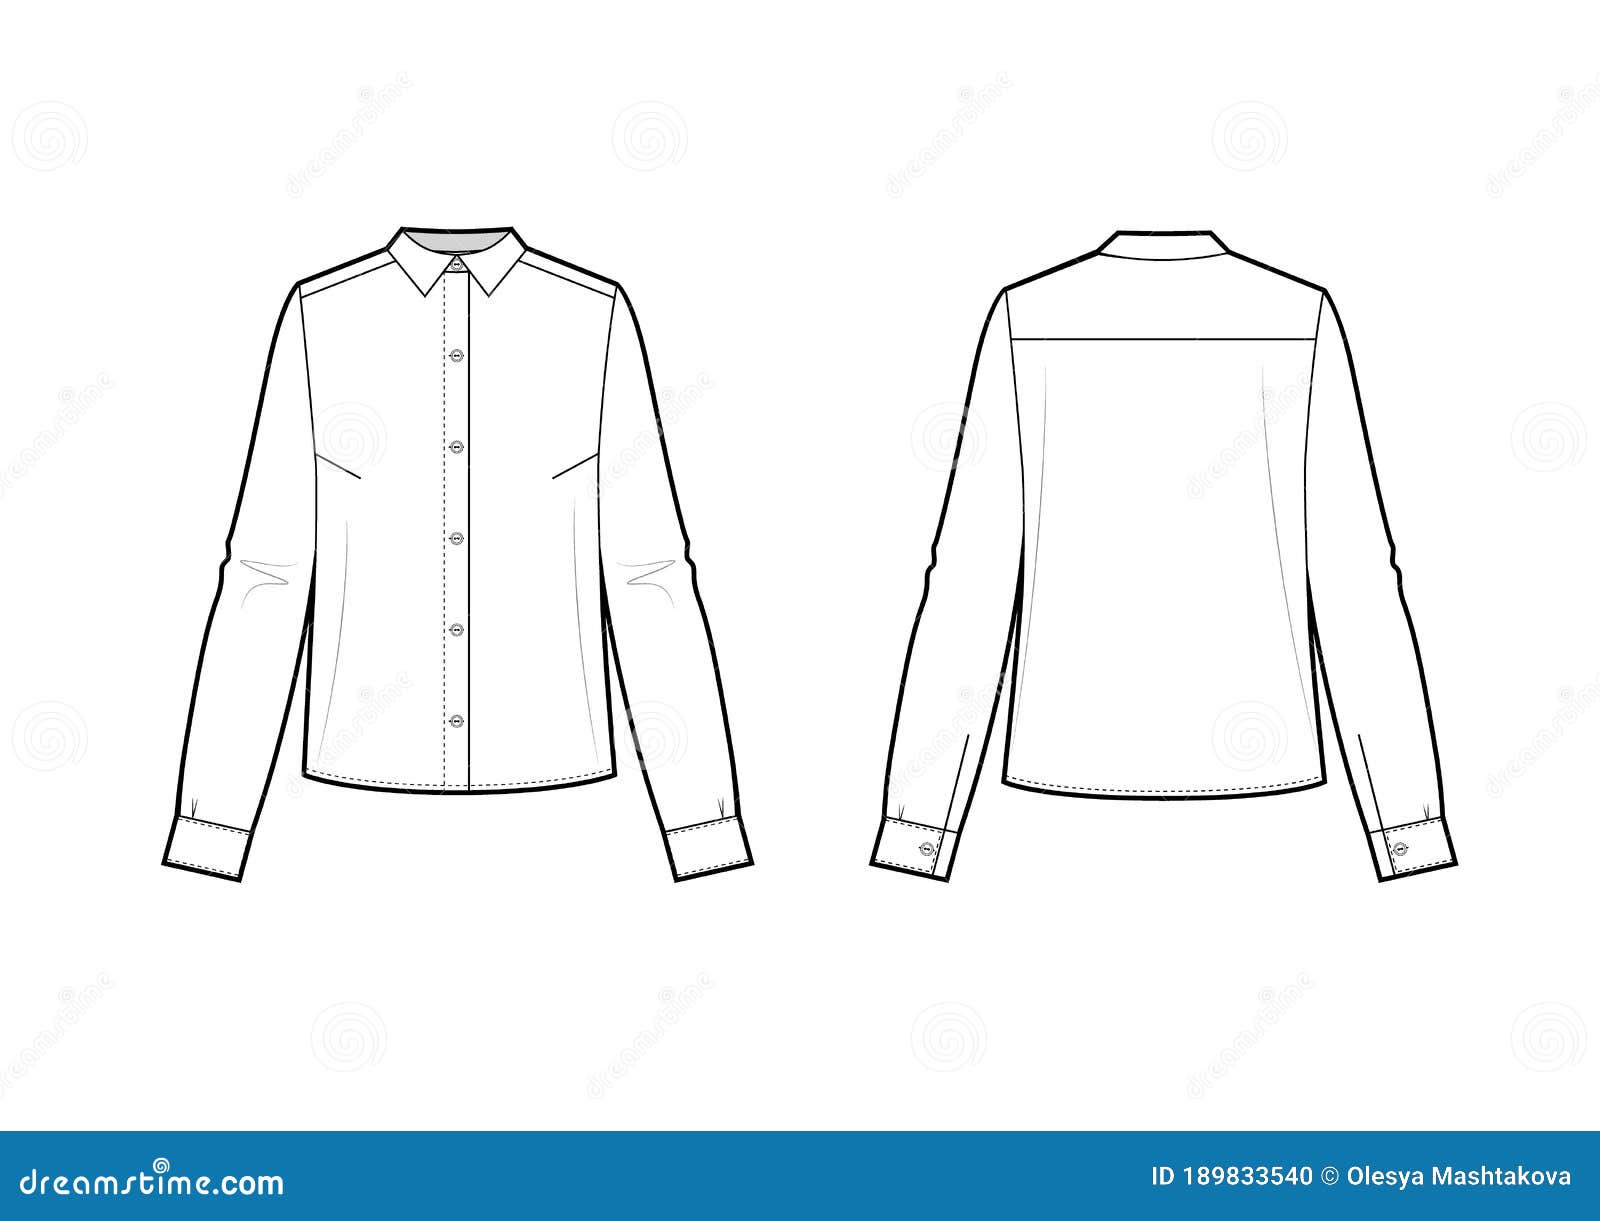 Classic Shirt Technical Fashion Illustration with Button Down Front ...